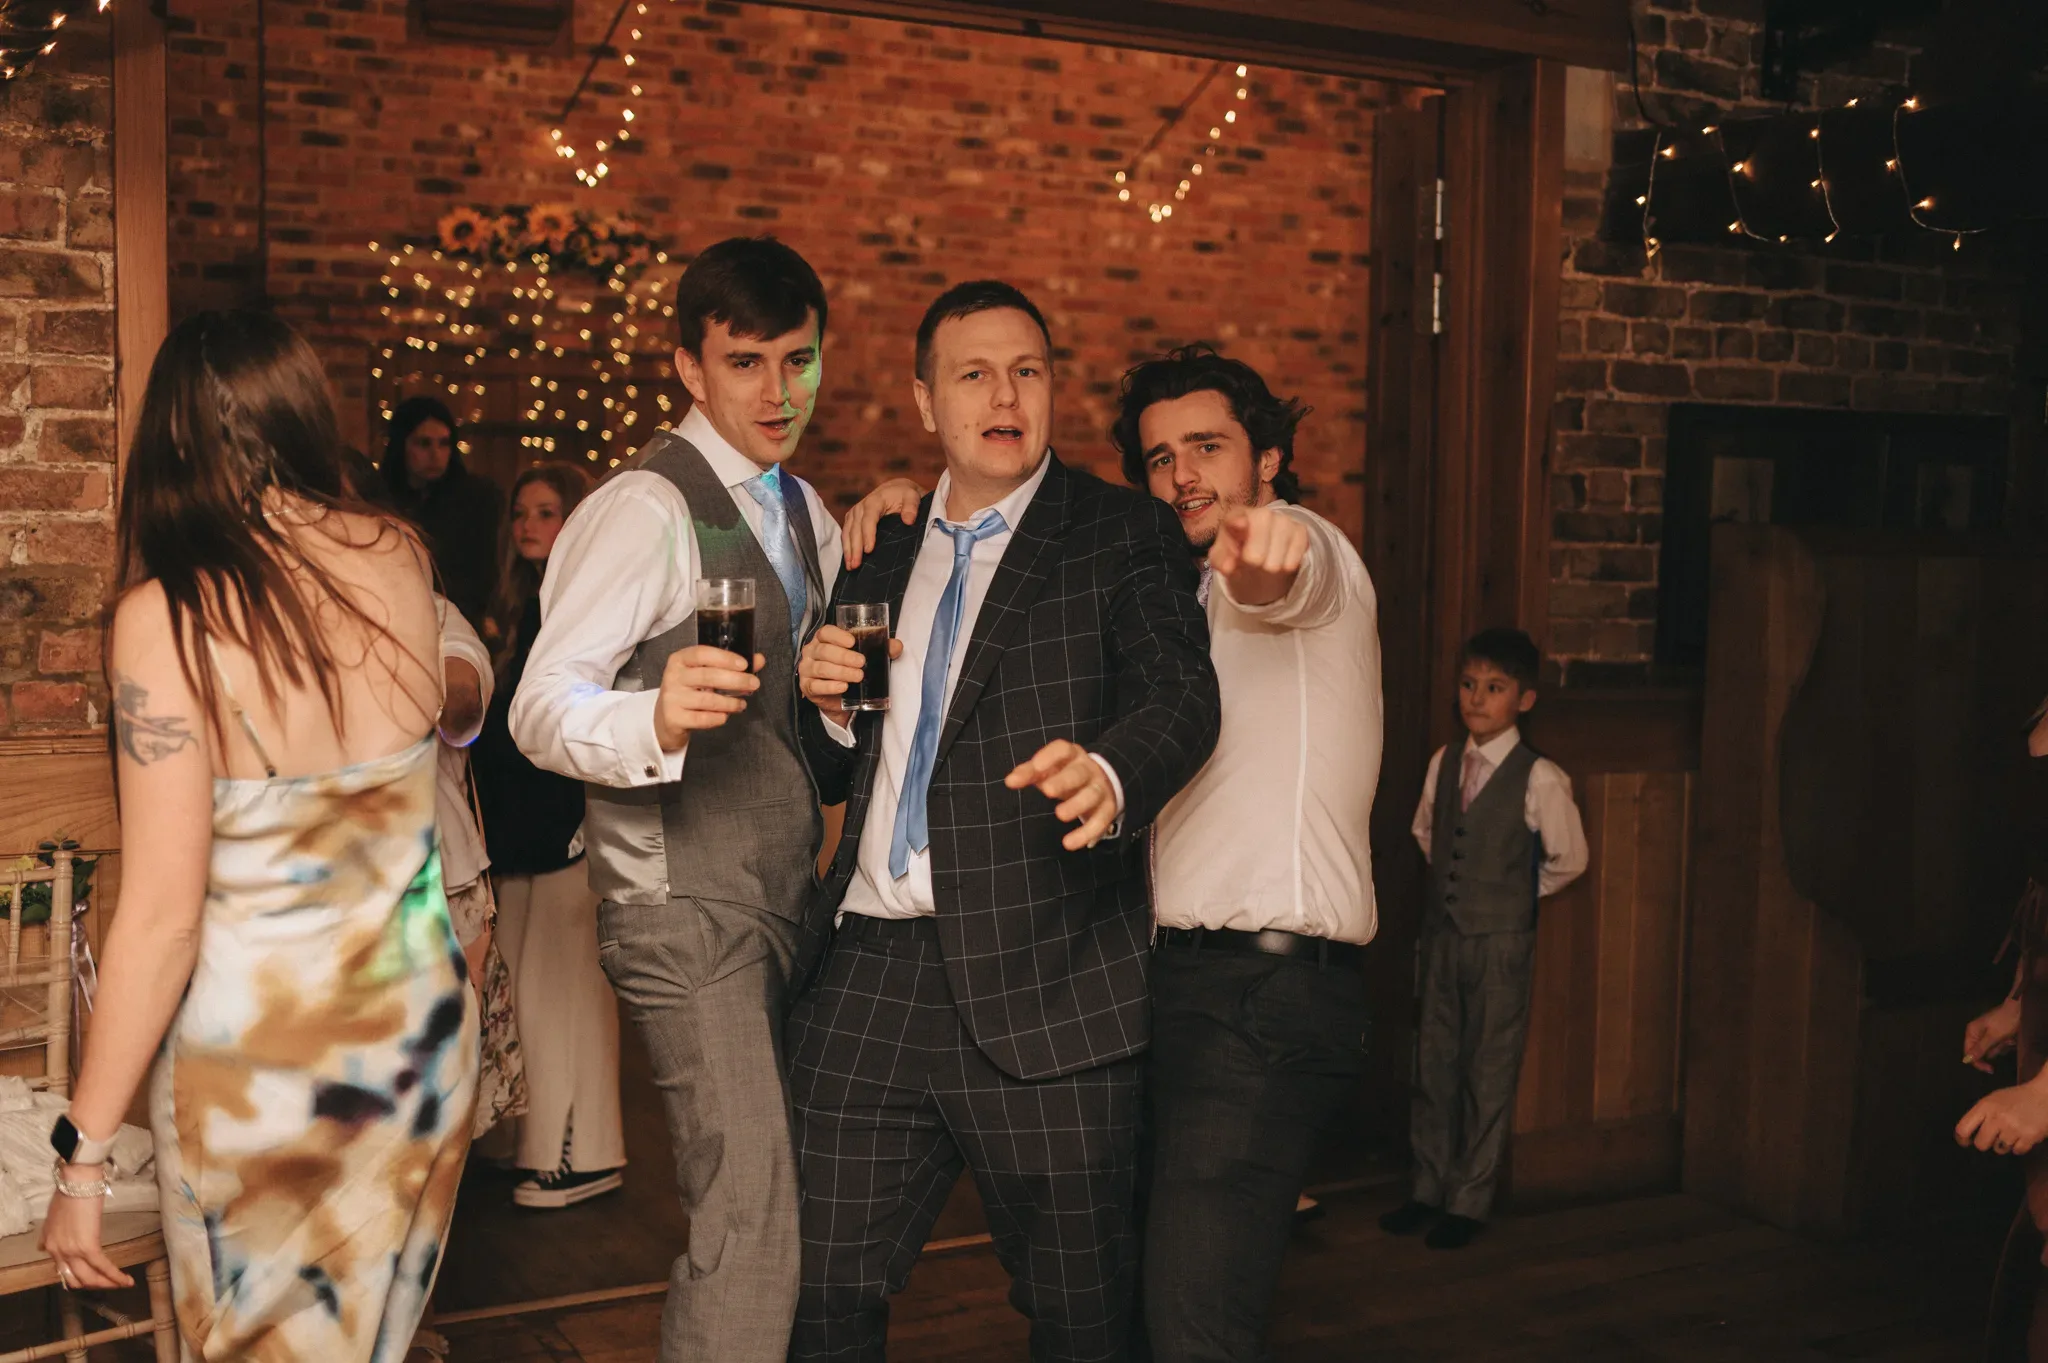 Three men in smart attire enjoy a celebration, sharing a toast with drinks in hand, while lively interactions and a dance floor hint at a wedding or festive party atmosphere.